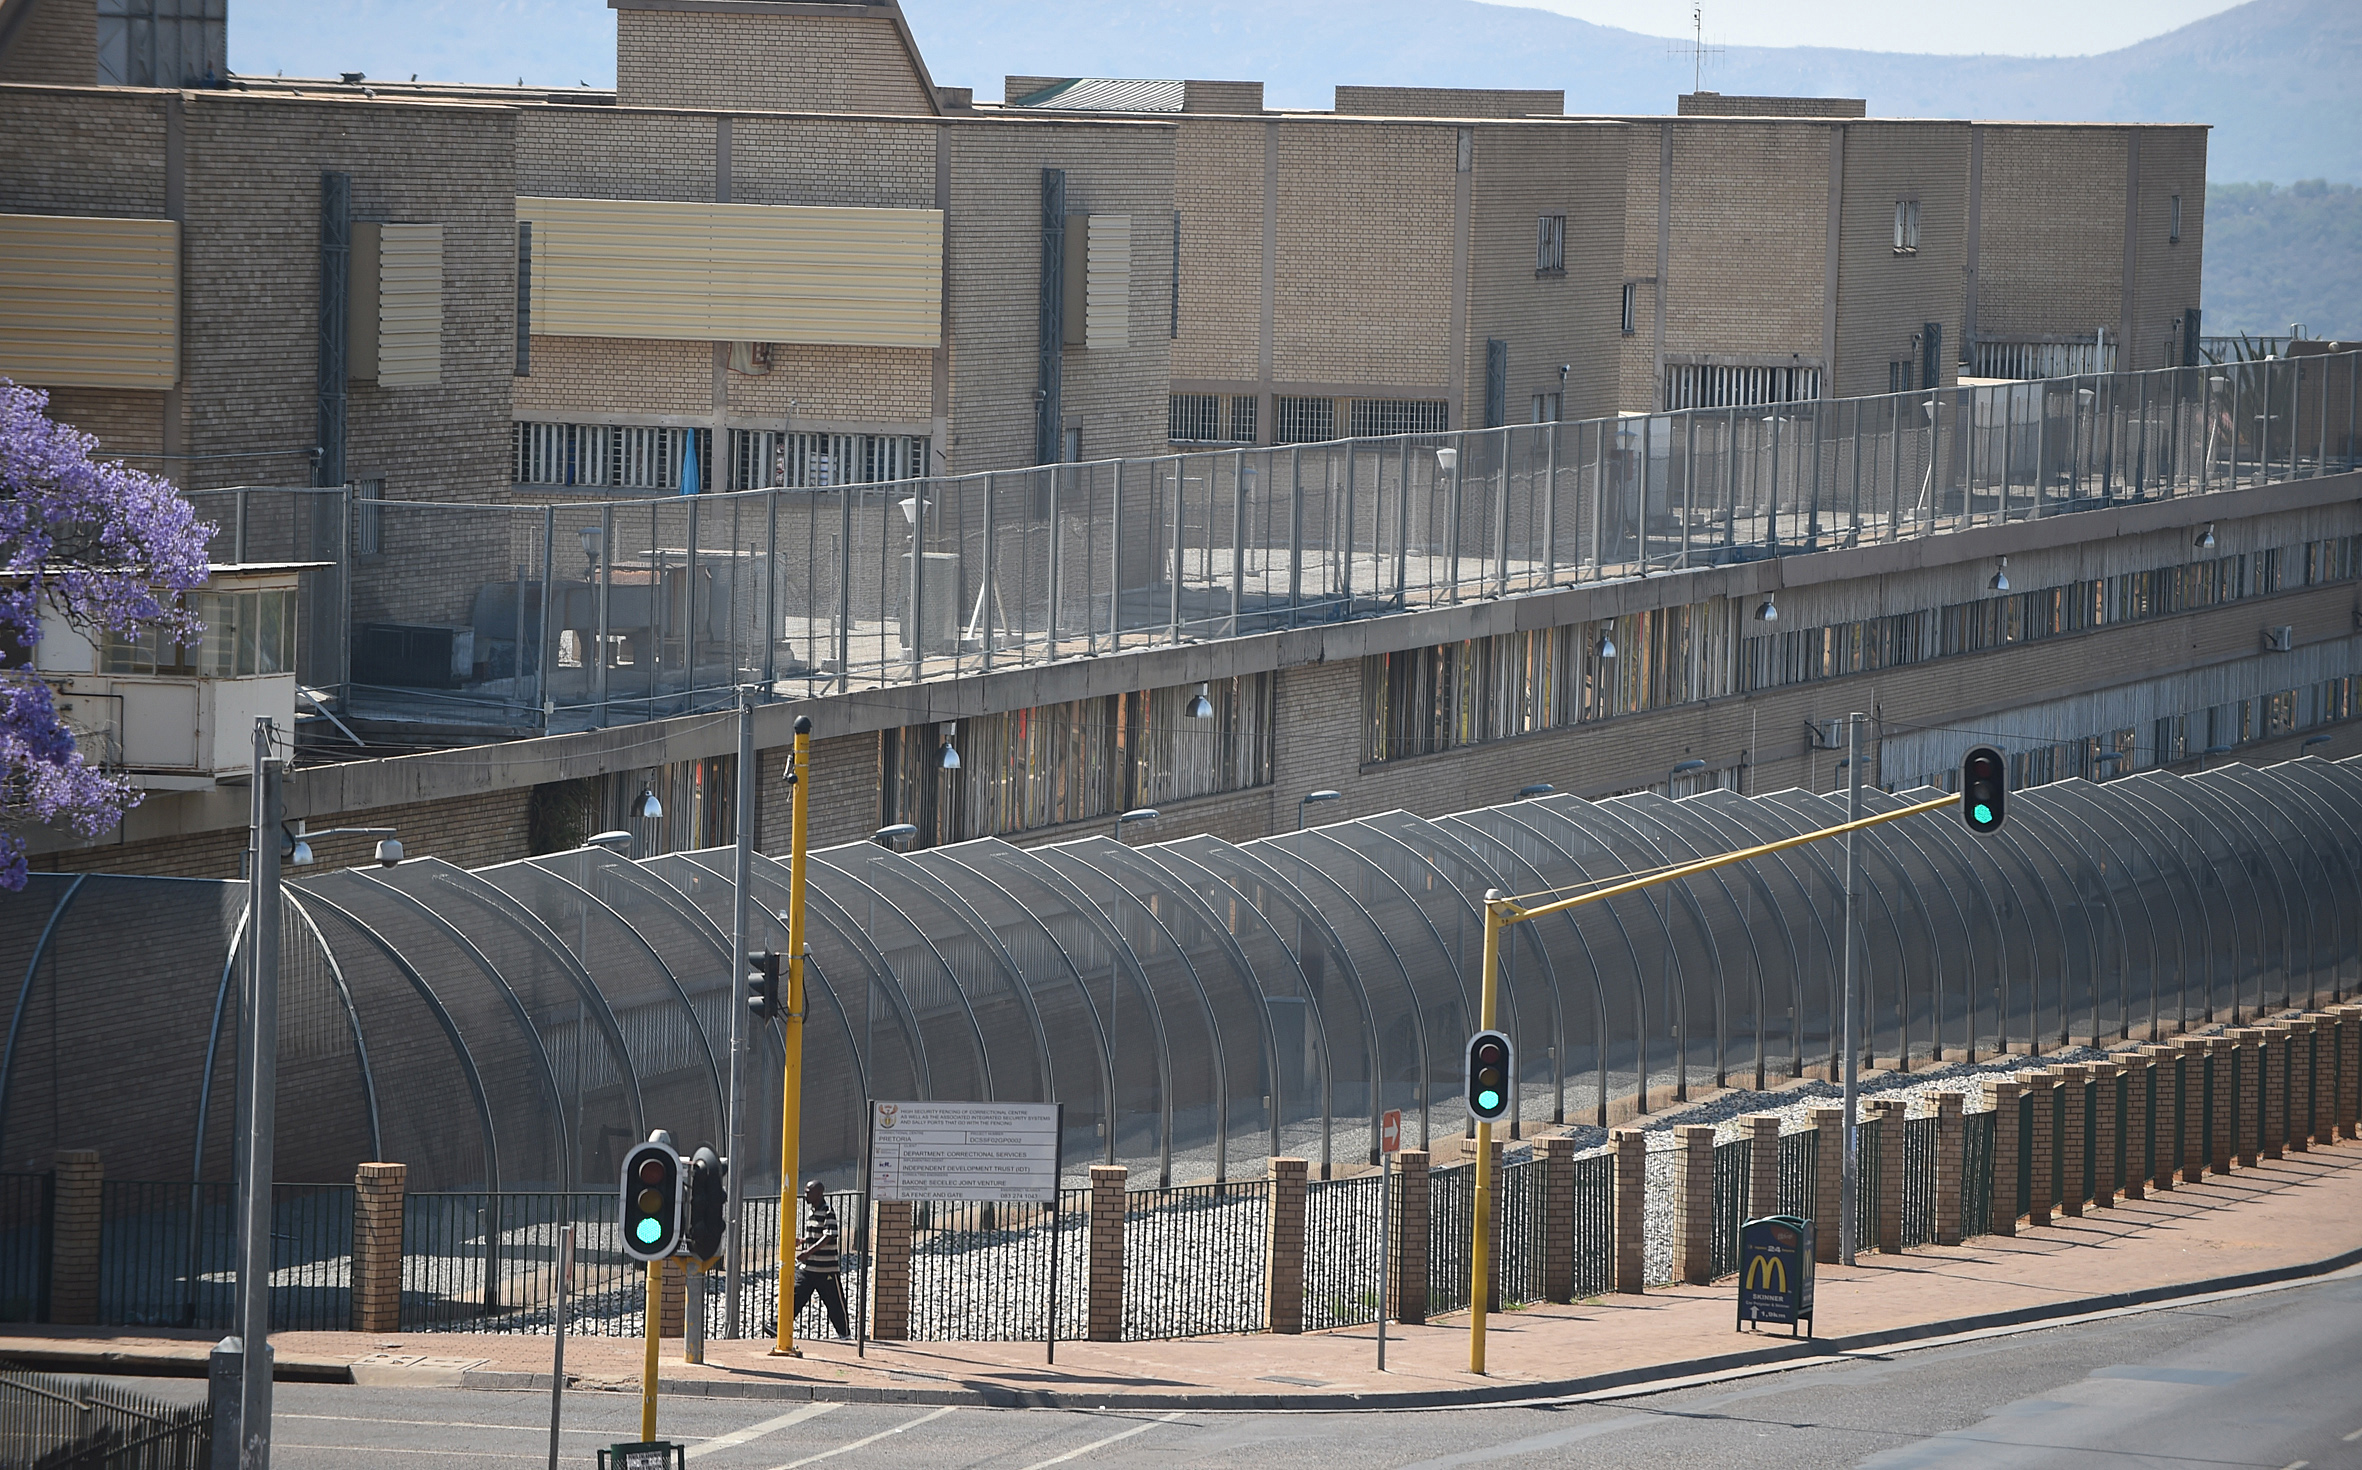 PHOTO: This Tuesday, Oct. 21, 2014 file photo shows the Kgosi Mampuru Correctional Services prison in Pretoria, South Africa.